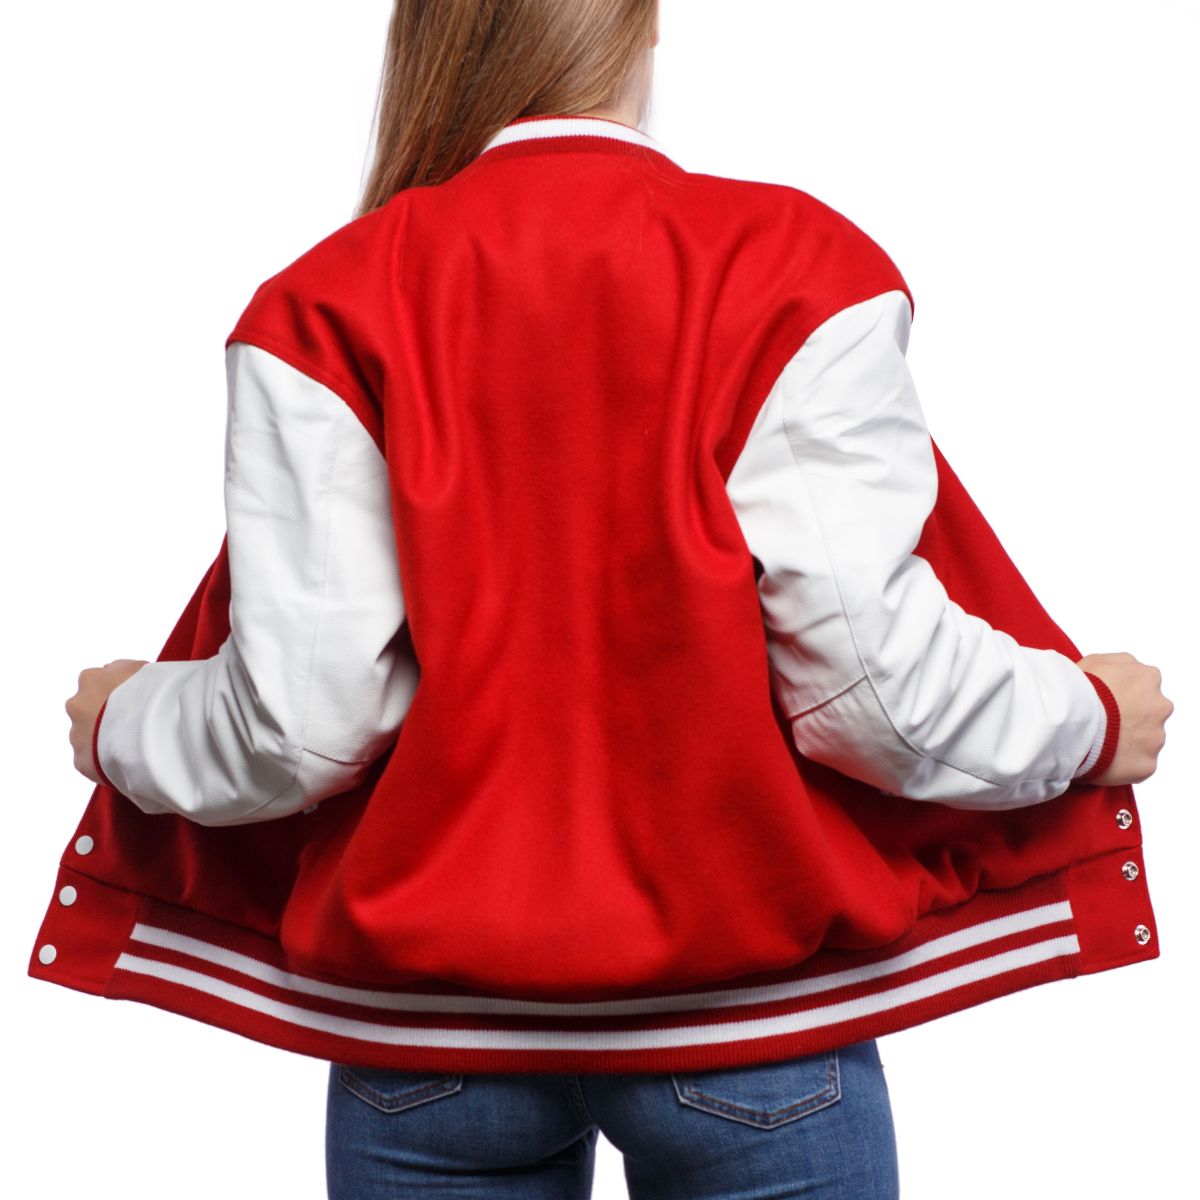 Women's Letterman Jacket with White Sleeves